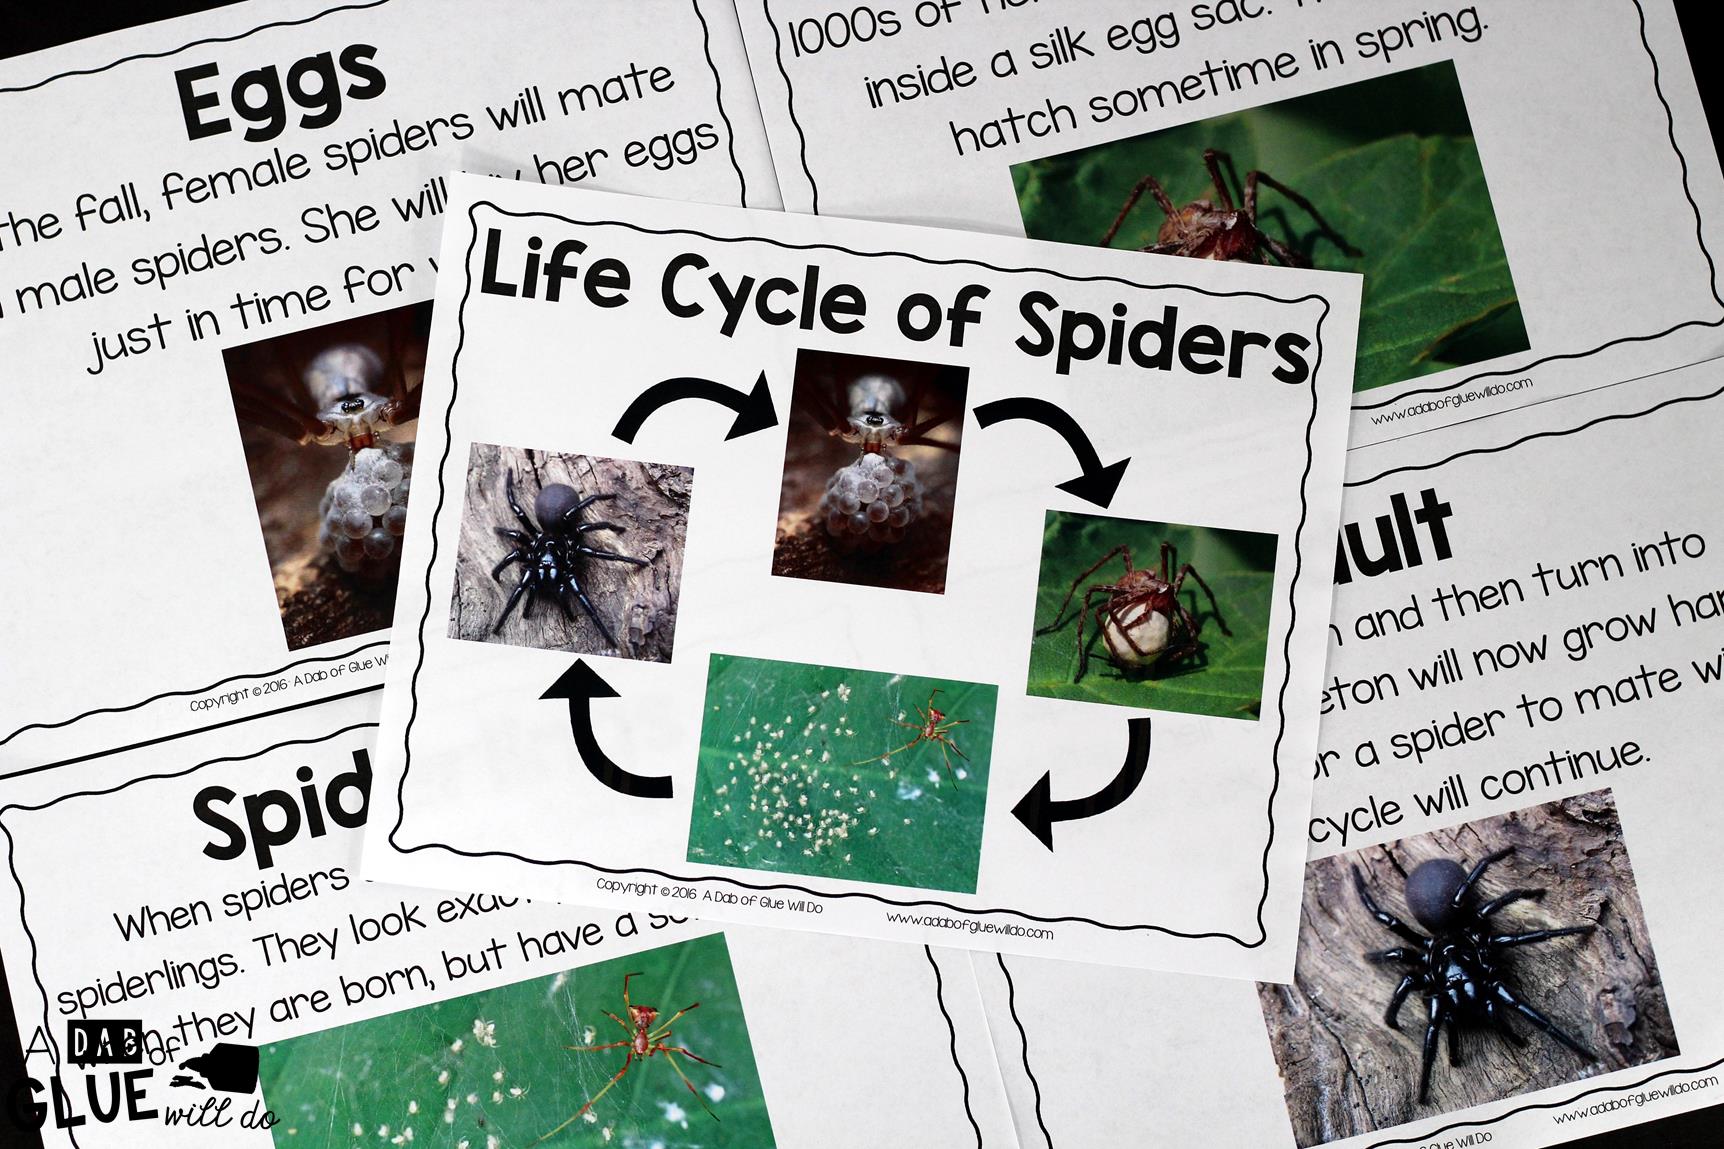 Engage your class in an exciting hands-on experience learning all about spiders! This Spiders: An Animal Study is perfect for science in Preschool, Pre-K, Kindergarten, First Grade, and Second Grade classrooms and packed full of inviting science activities. Students will learn about the difference between spiders and insects, parts of a spider, a spider's life cycle, and many more fun facts. When students are done they can complete a spider research project. This pack is great for homeschoolers, kids craft activities, and to add to your unit studies!